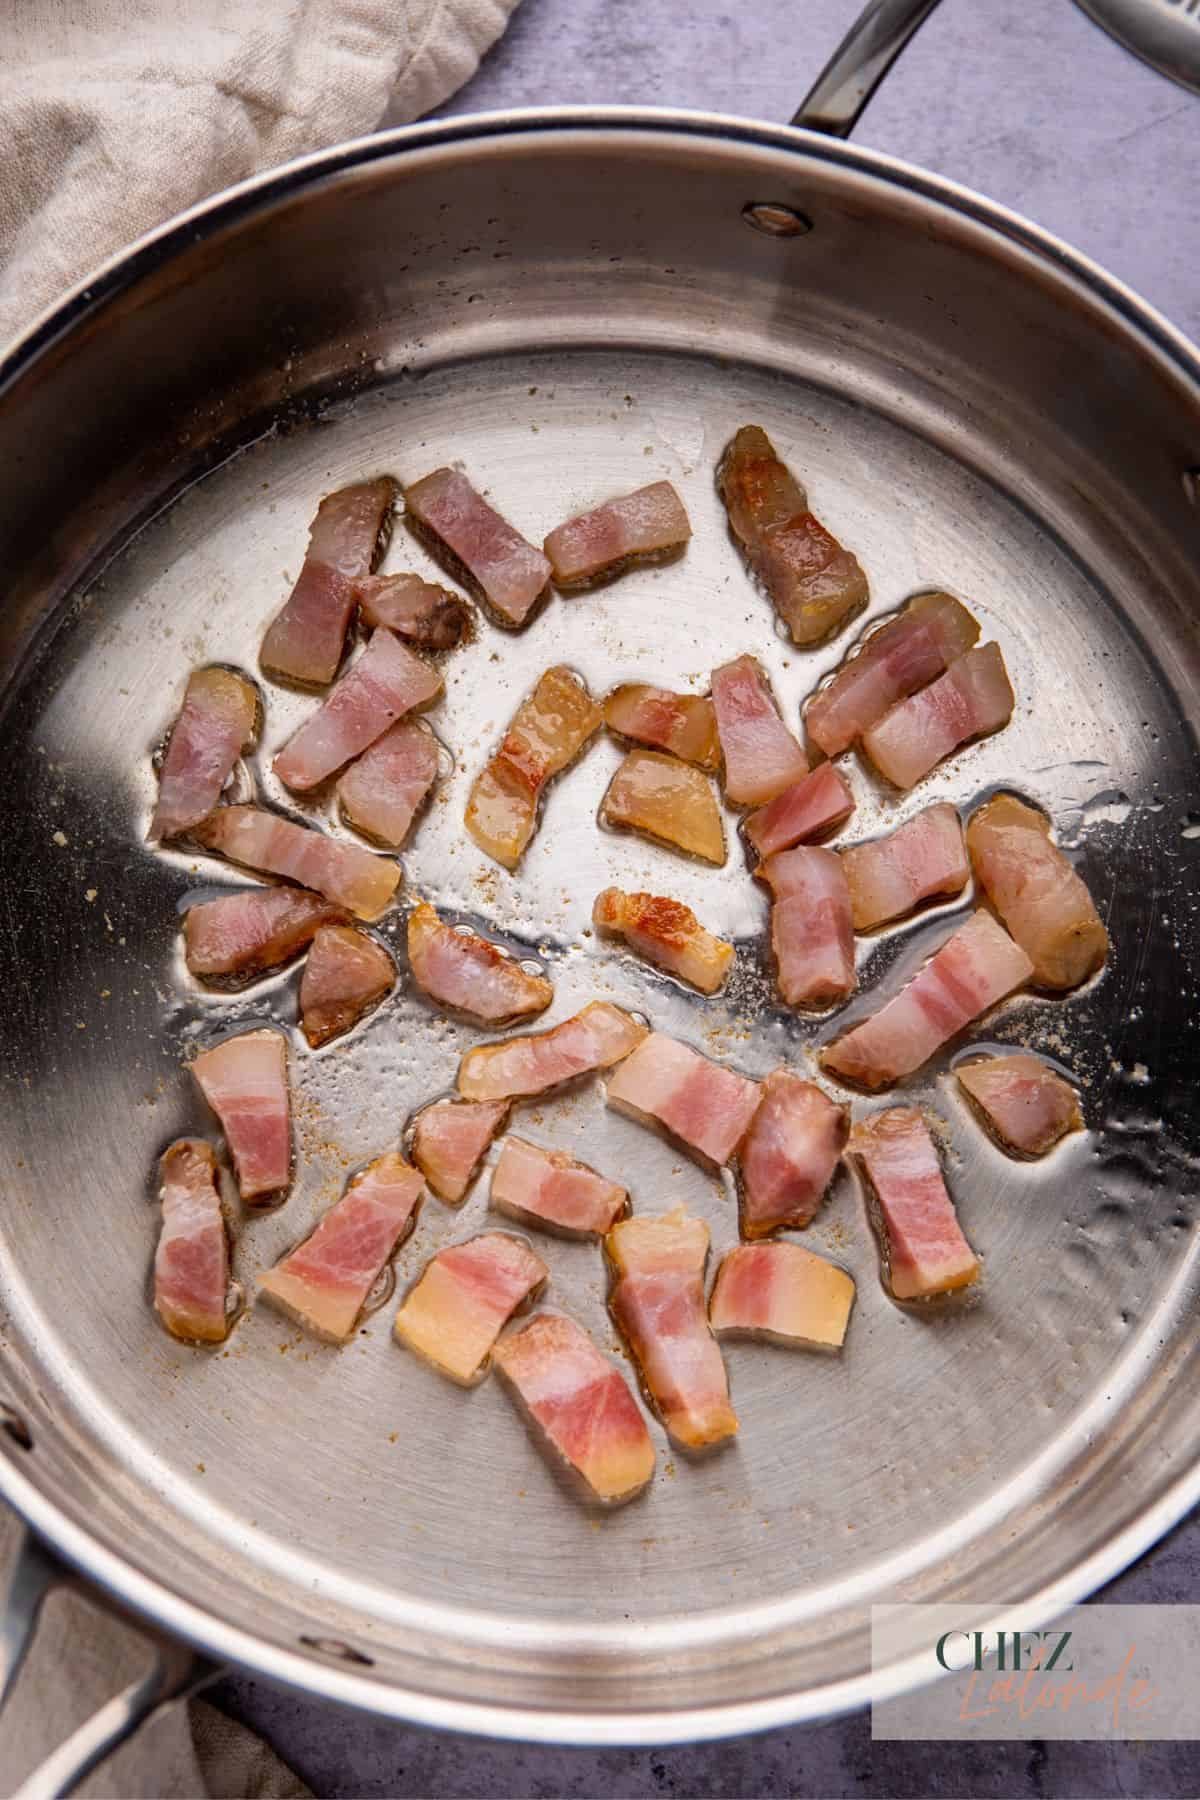 Searing strips of guanciale in a big frying pan. They are starting to cook.